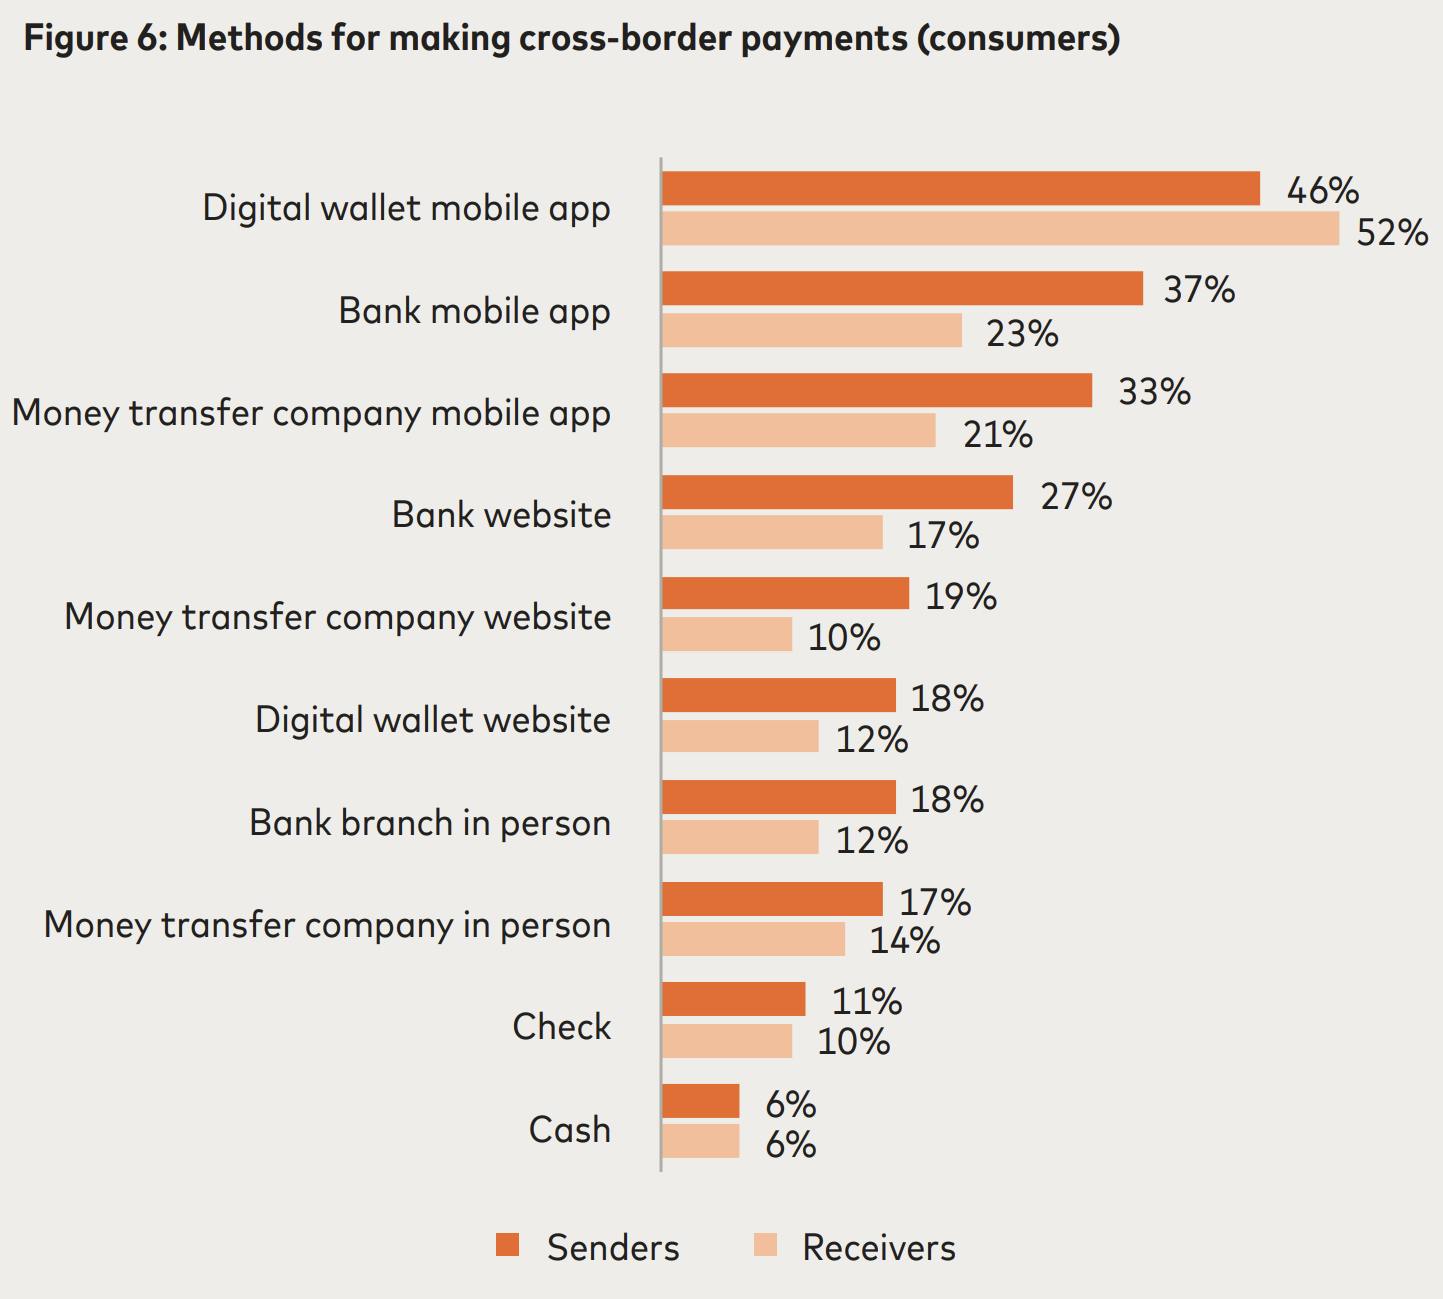 Graph showing consumer cross-border payment methods 